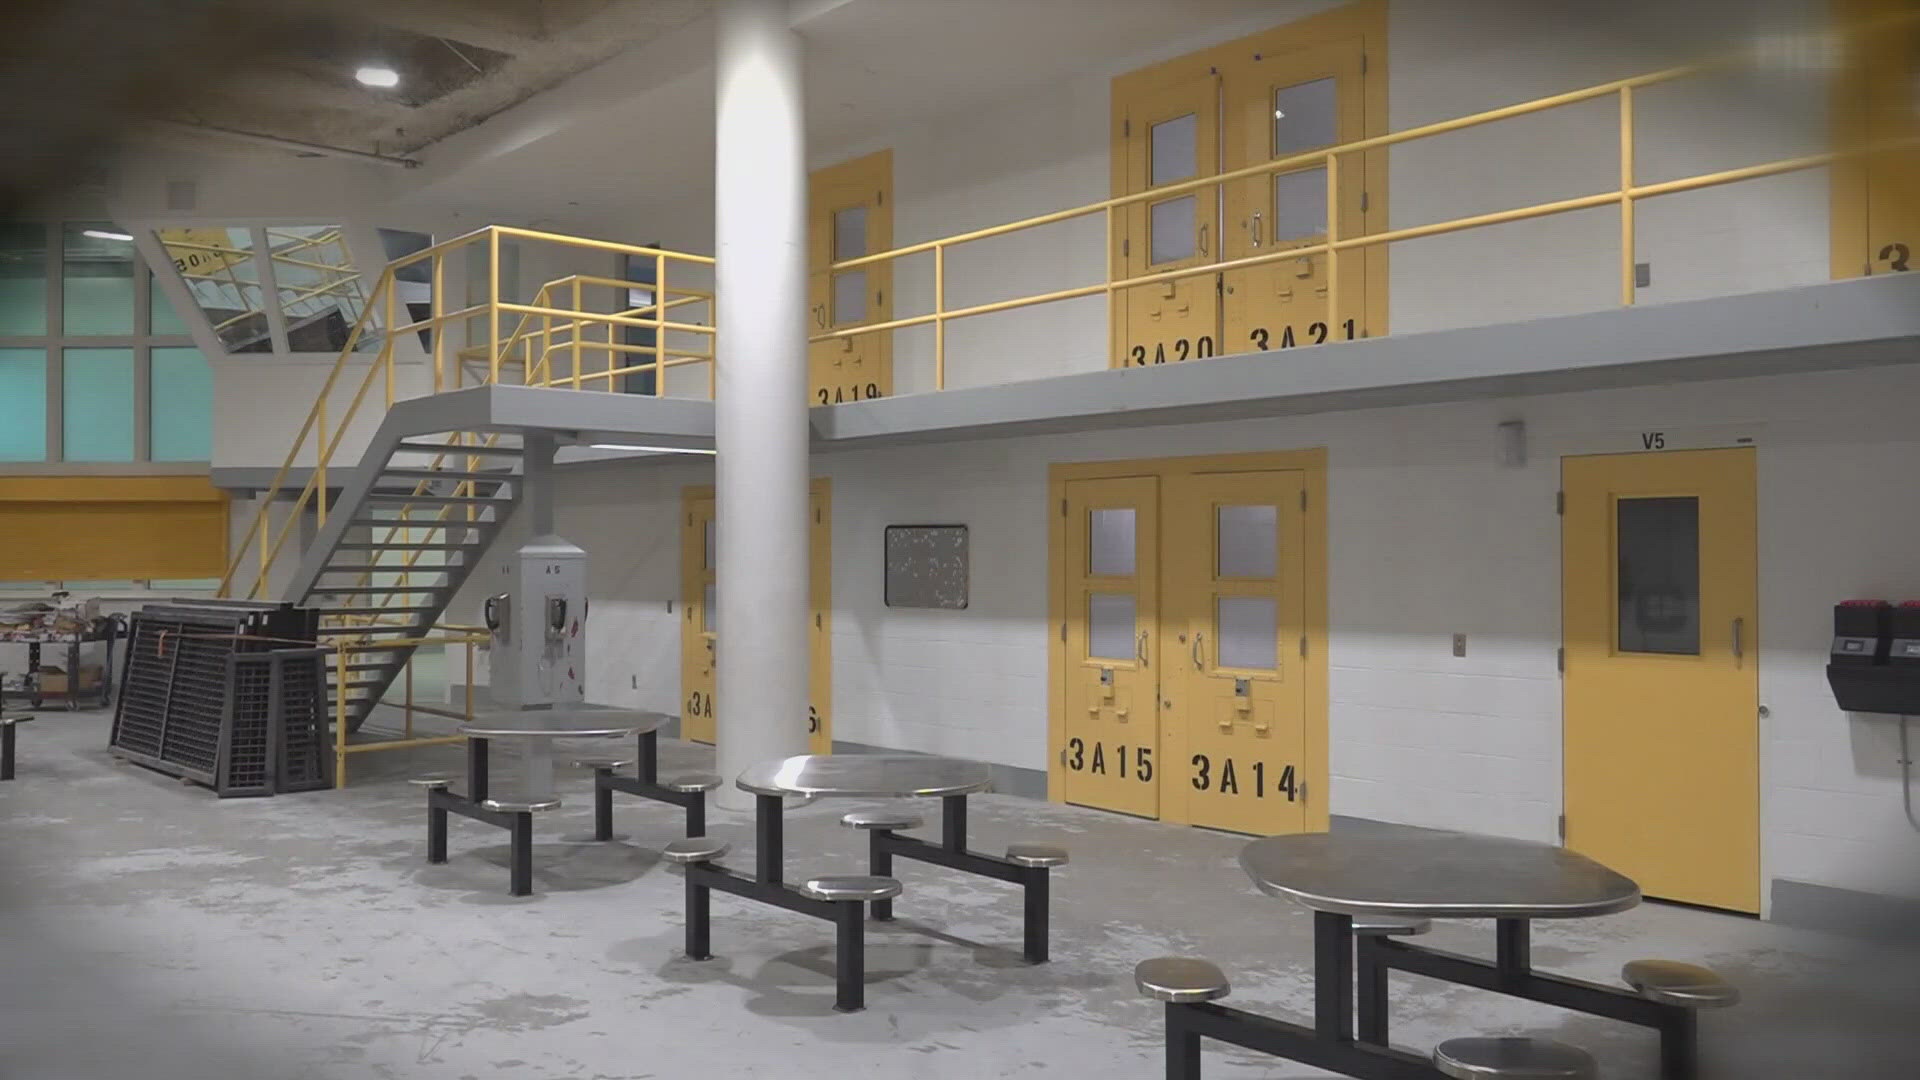 The Jail Oversight Board will meet with detainees at the St. Louis City Justice Center on Thursday. They hope to hear from inmates about jail conditions.